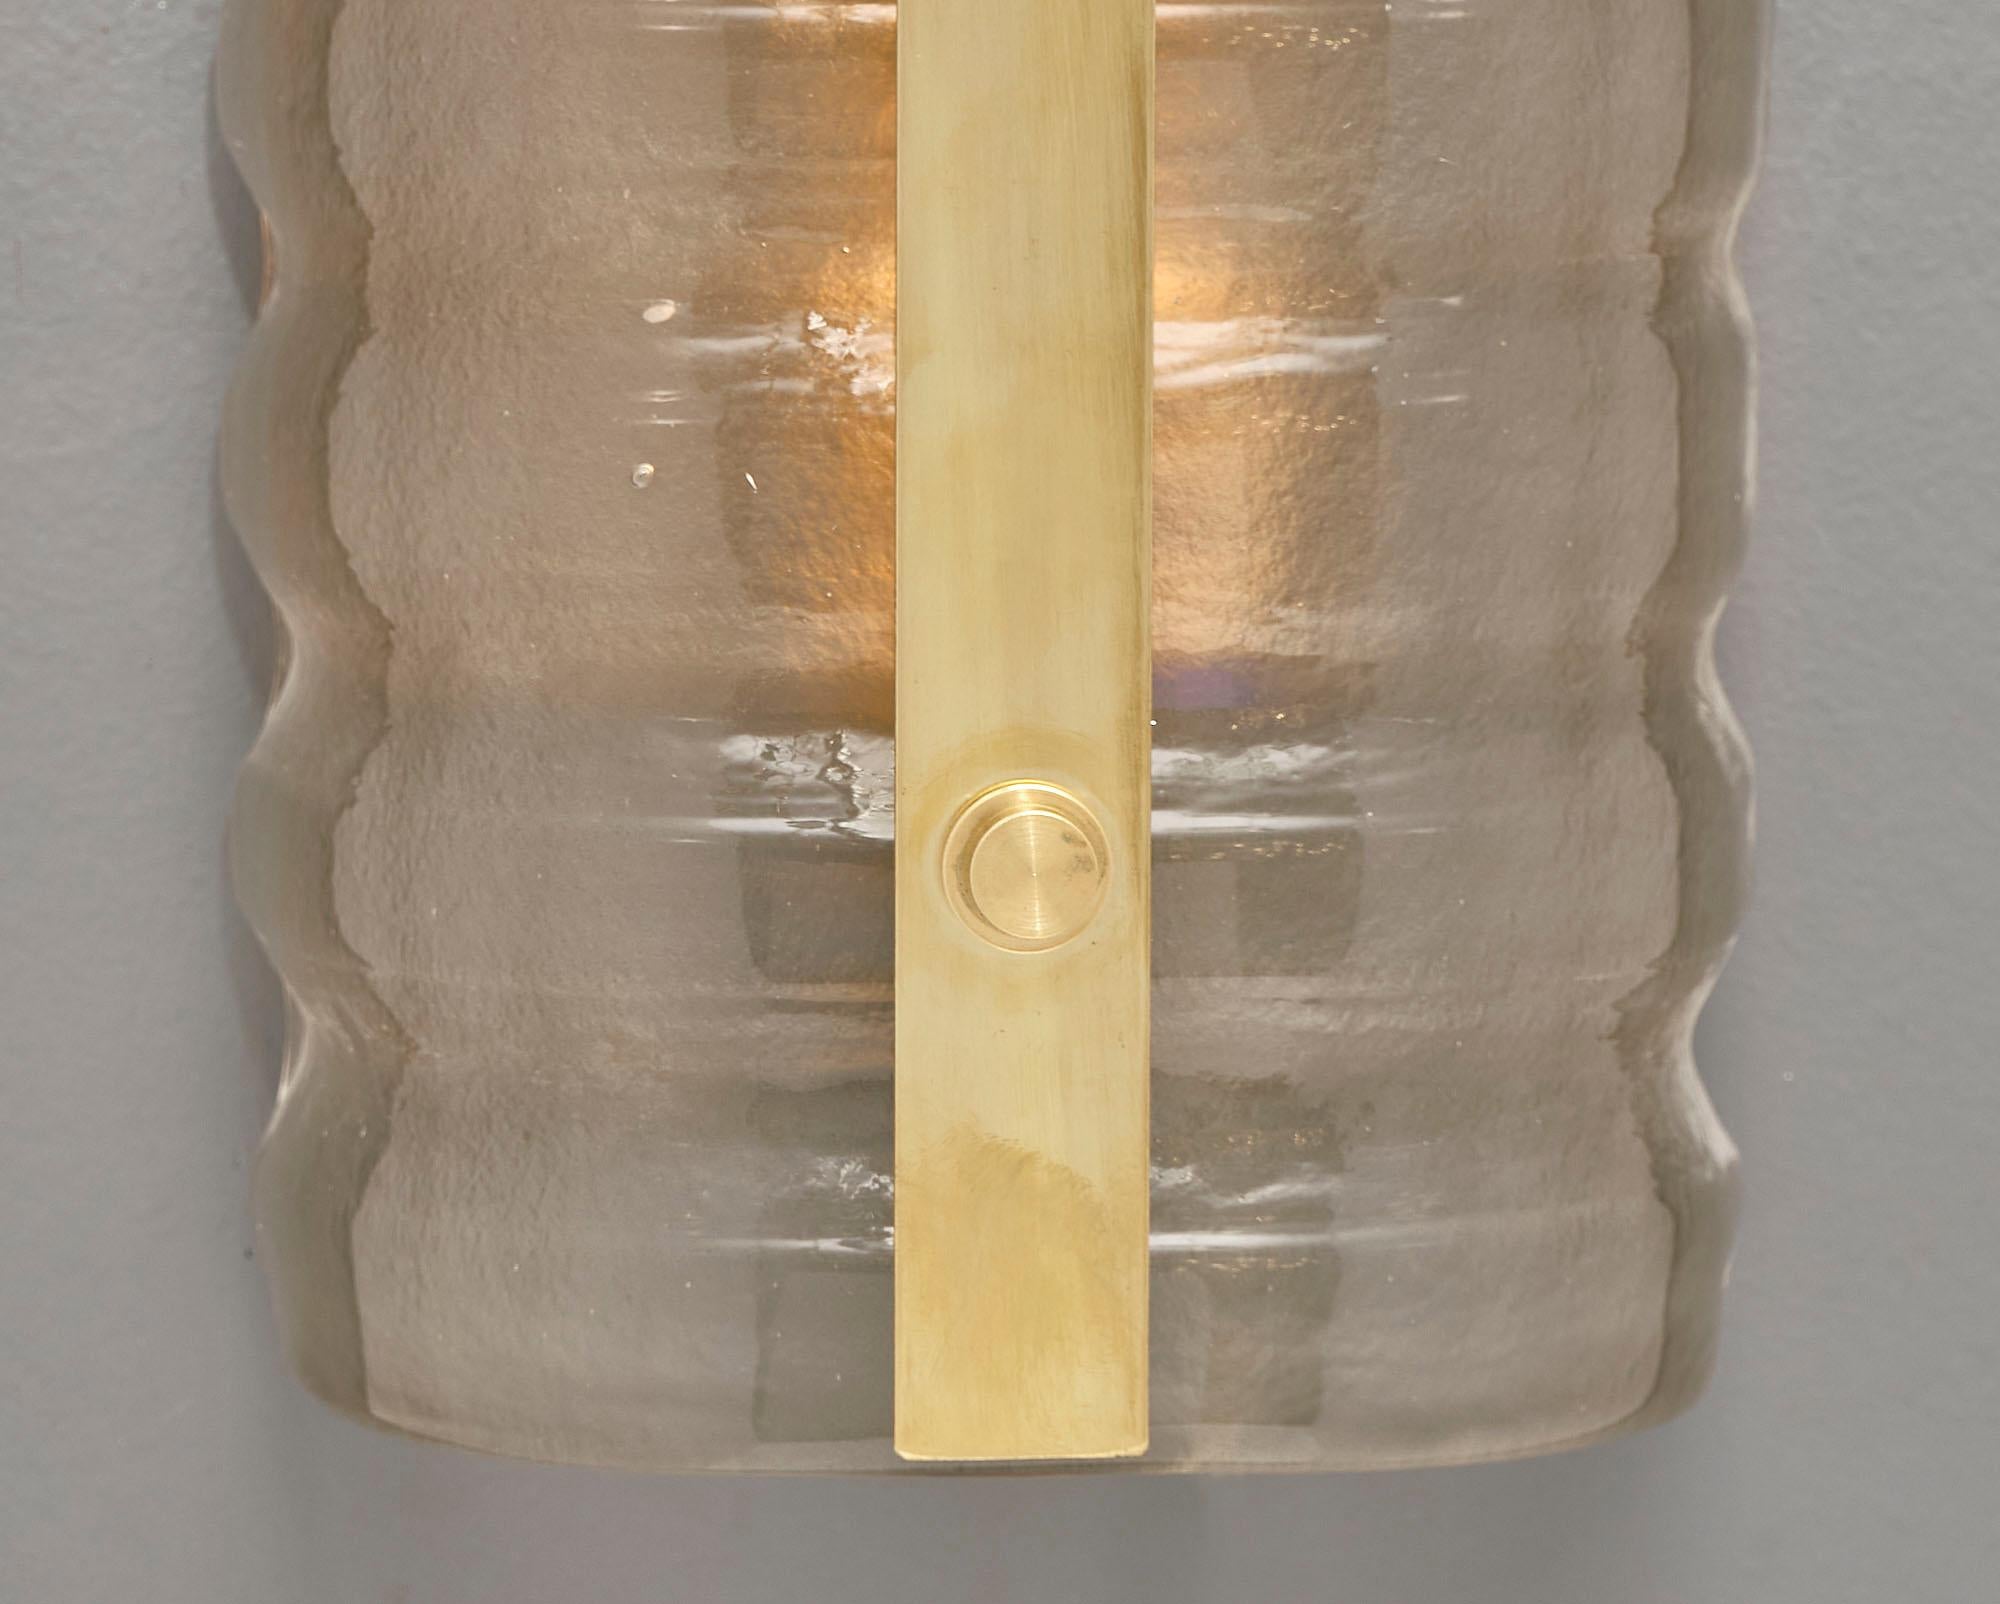 Murano glass and brass sconces with thick hand-blown undulating glass in a light amber color with a gilt brass trim. This pair has been newly wired to fit US standards.
This pair is currently located at our dealer's warehouse in Italy.